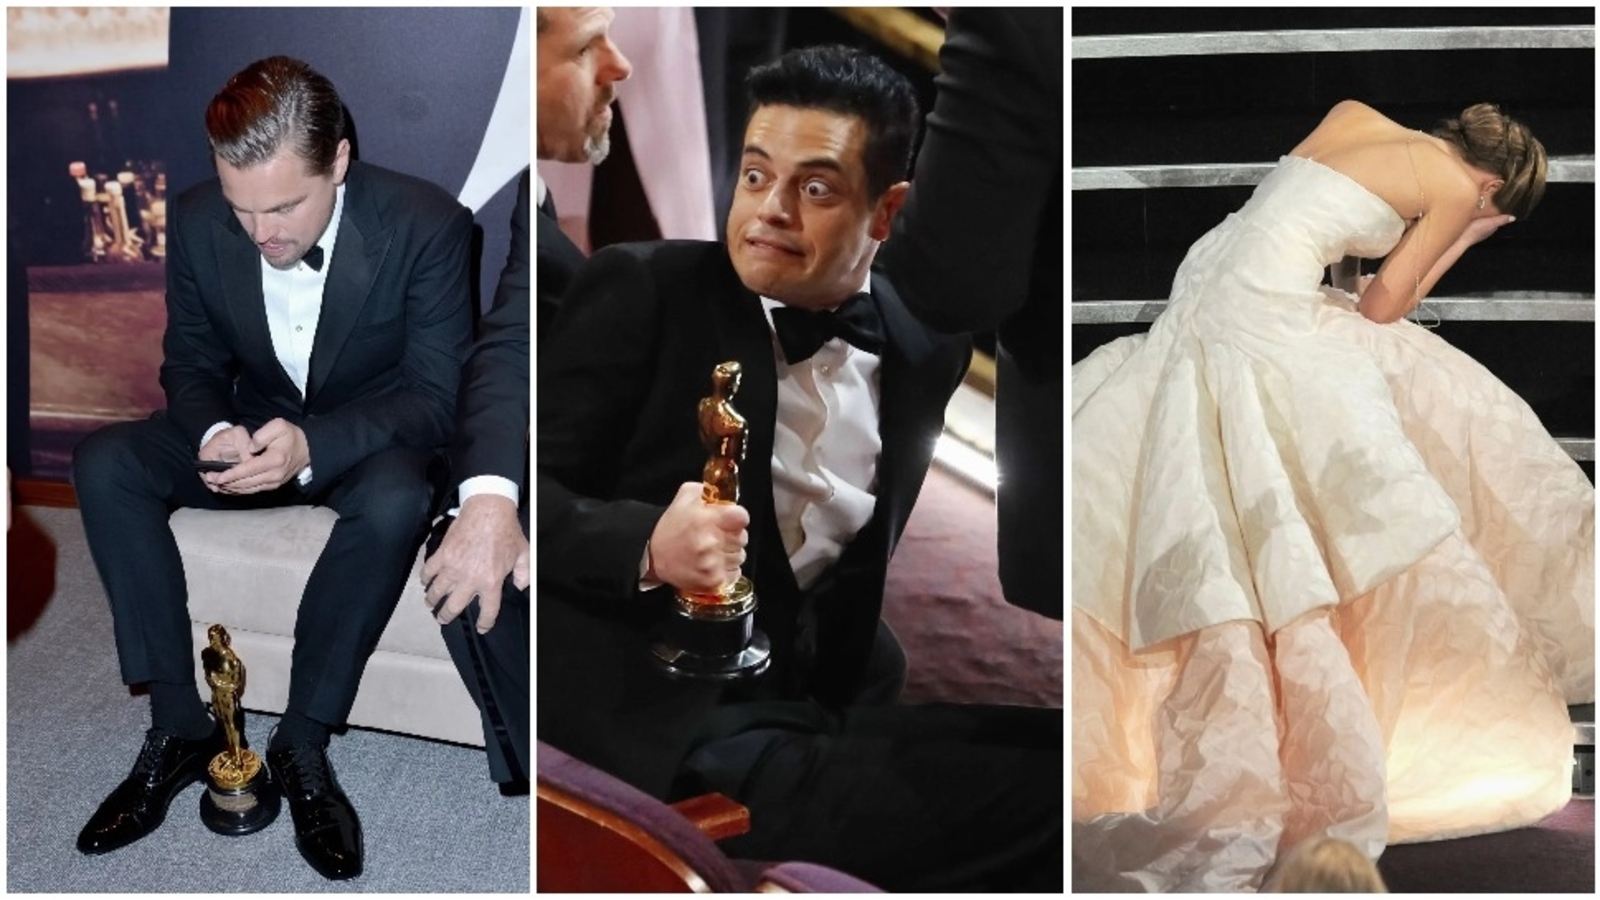 Oscars: From Leonardo DiCaprio’s win to Jennifer Lawrence and Rami Malek’s falls- some iconic moments over the years